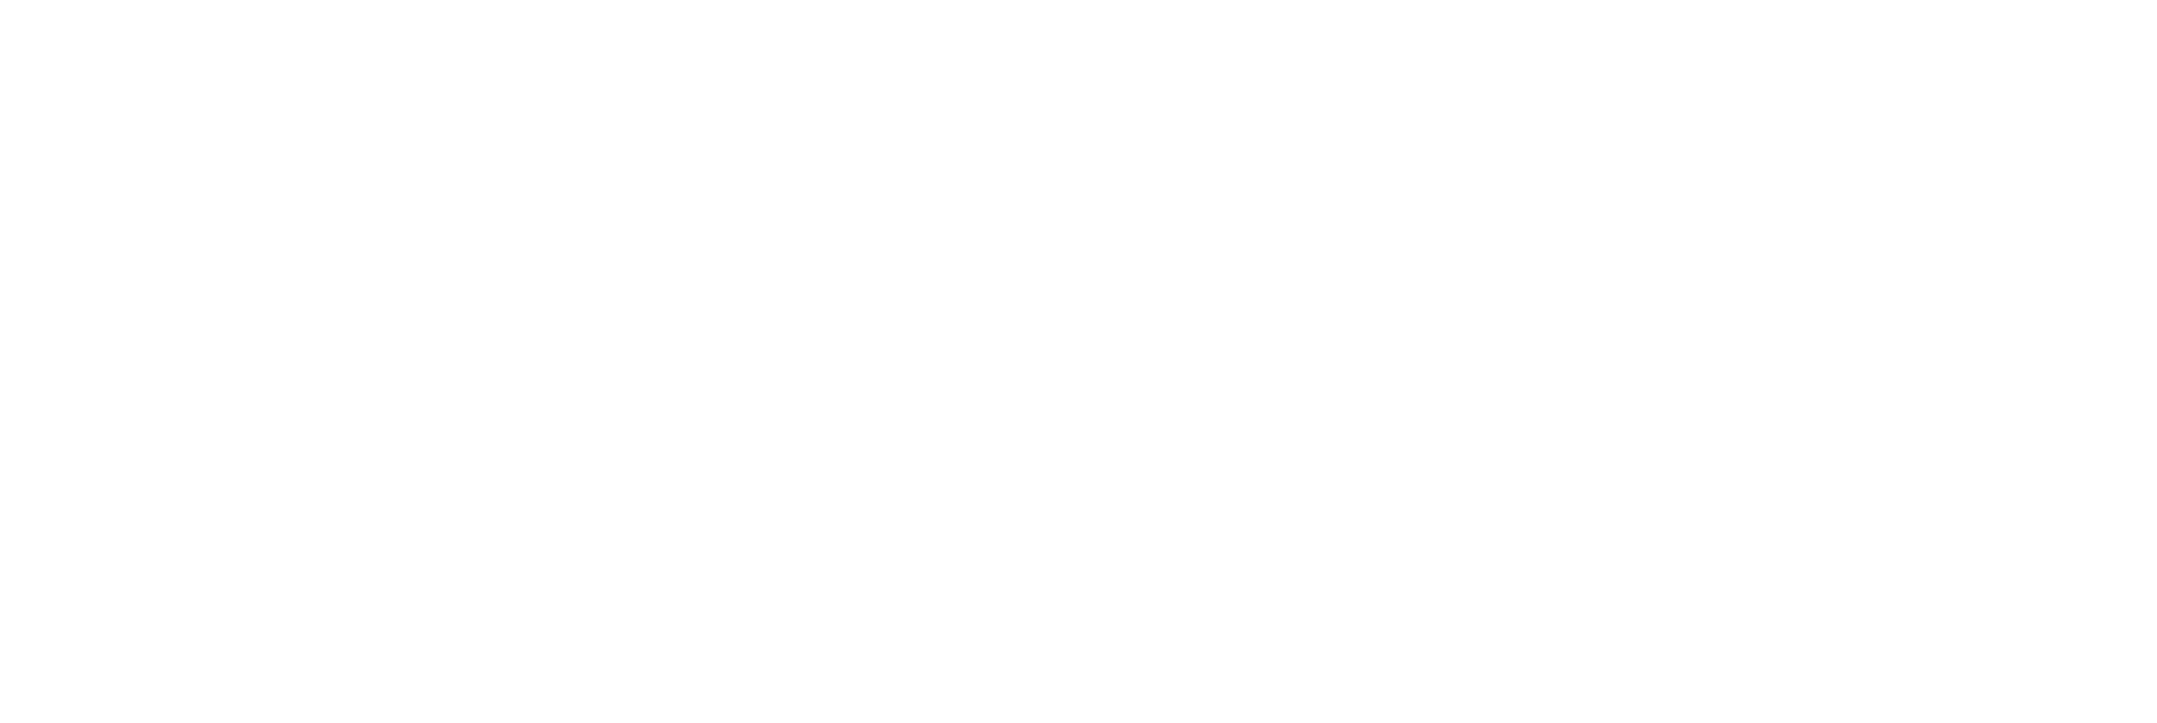 Cyber security quirks logo